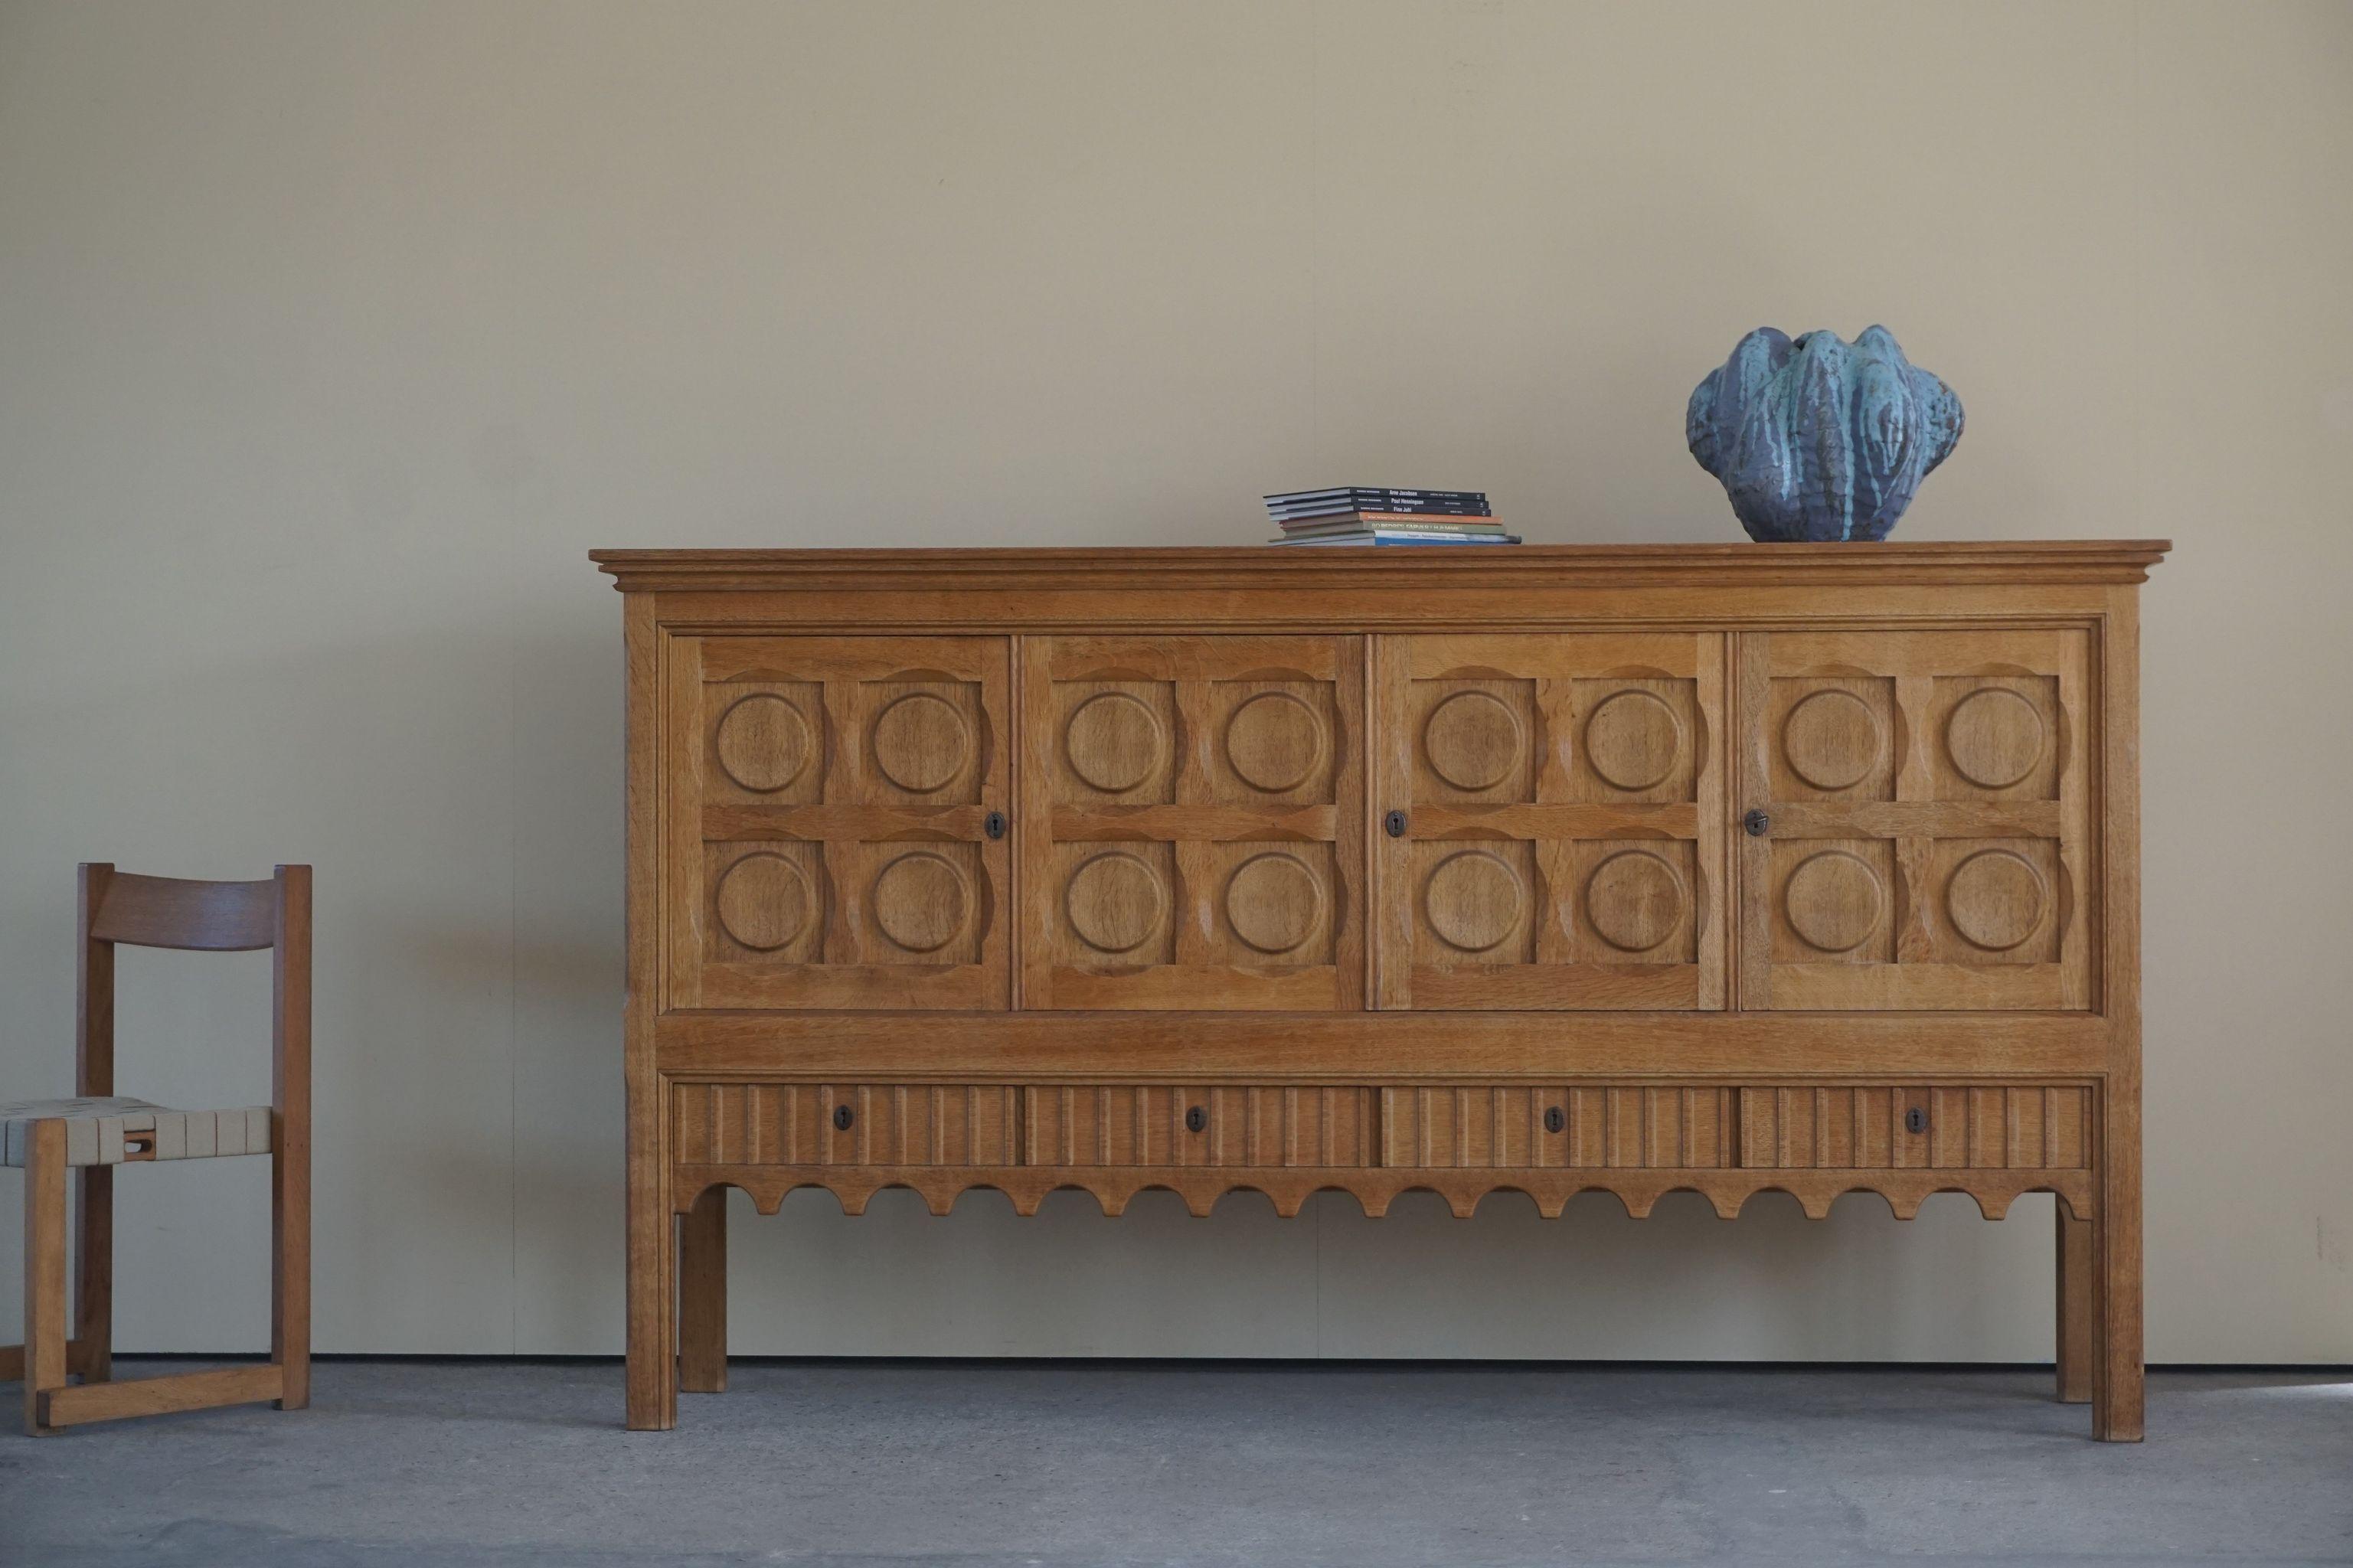 Danish Mid Century rectangular brutalist sideboard, made in solid Oak, ca 1950s

A great patina and a nice sculptural front design. 

Goes well in every kind of interior. From the classic to the modern home.